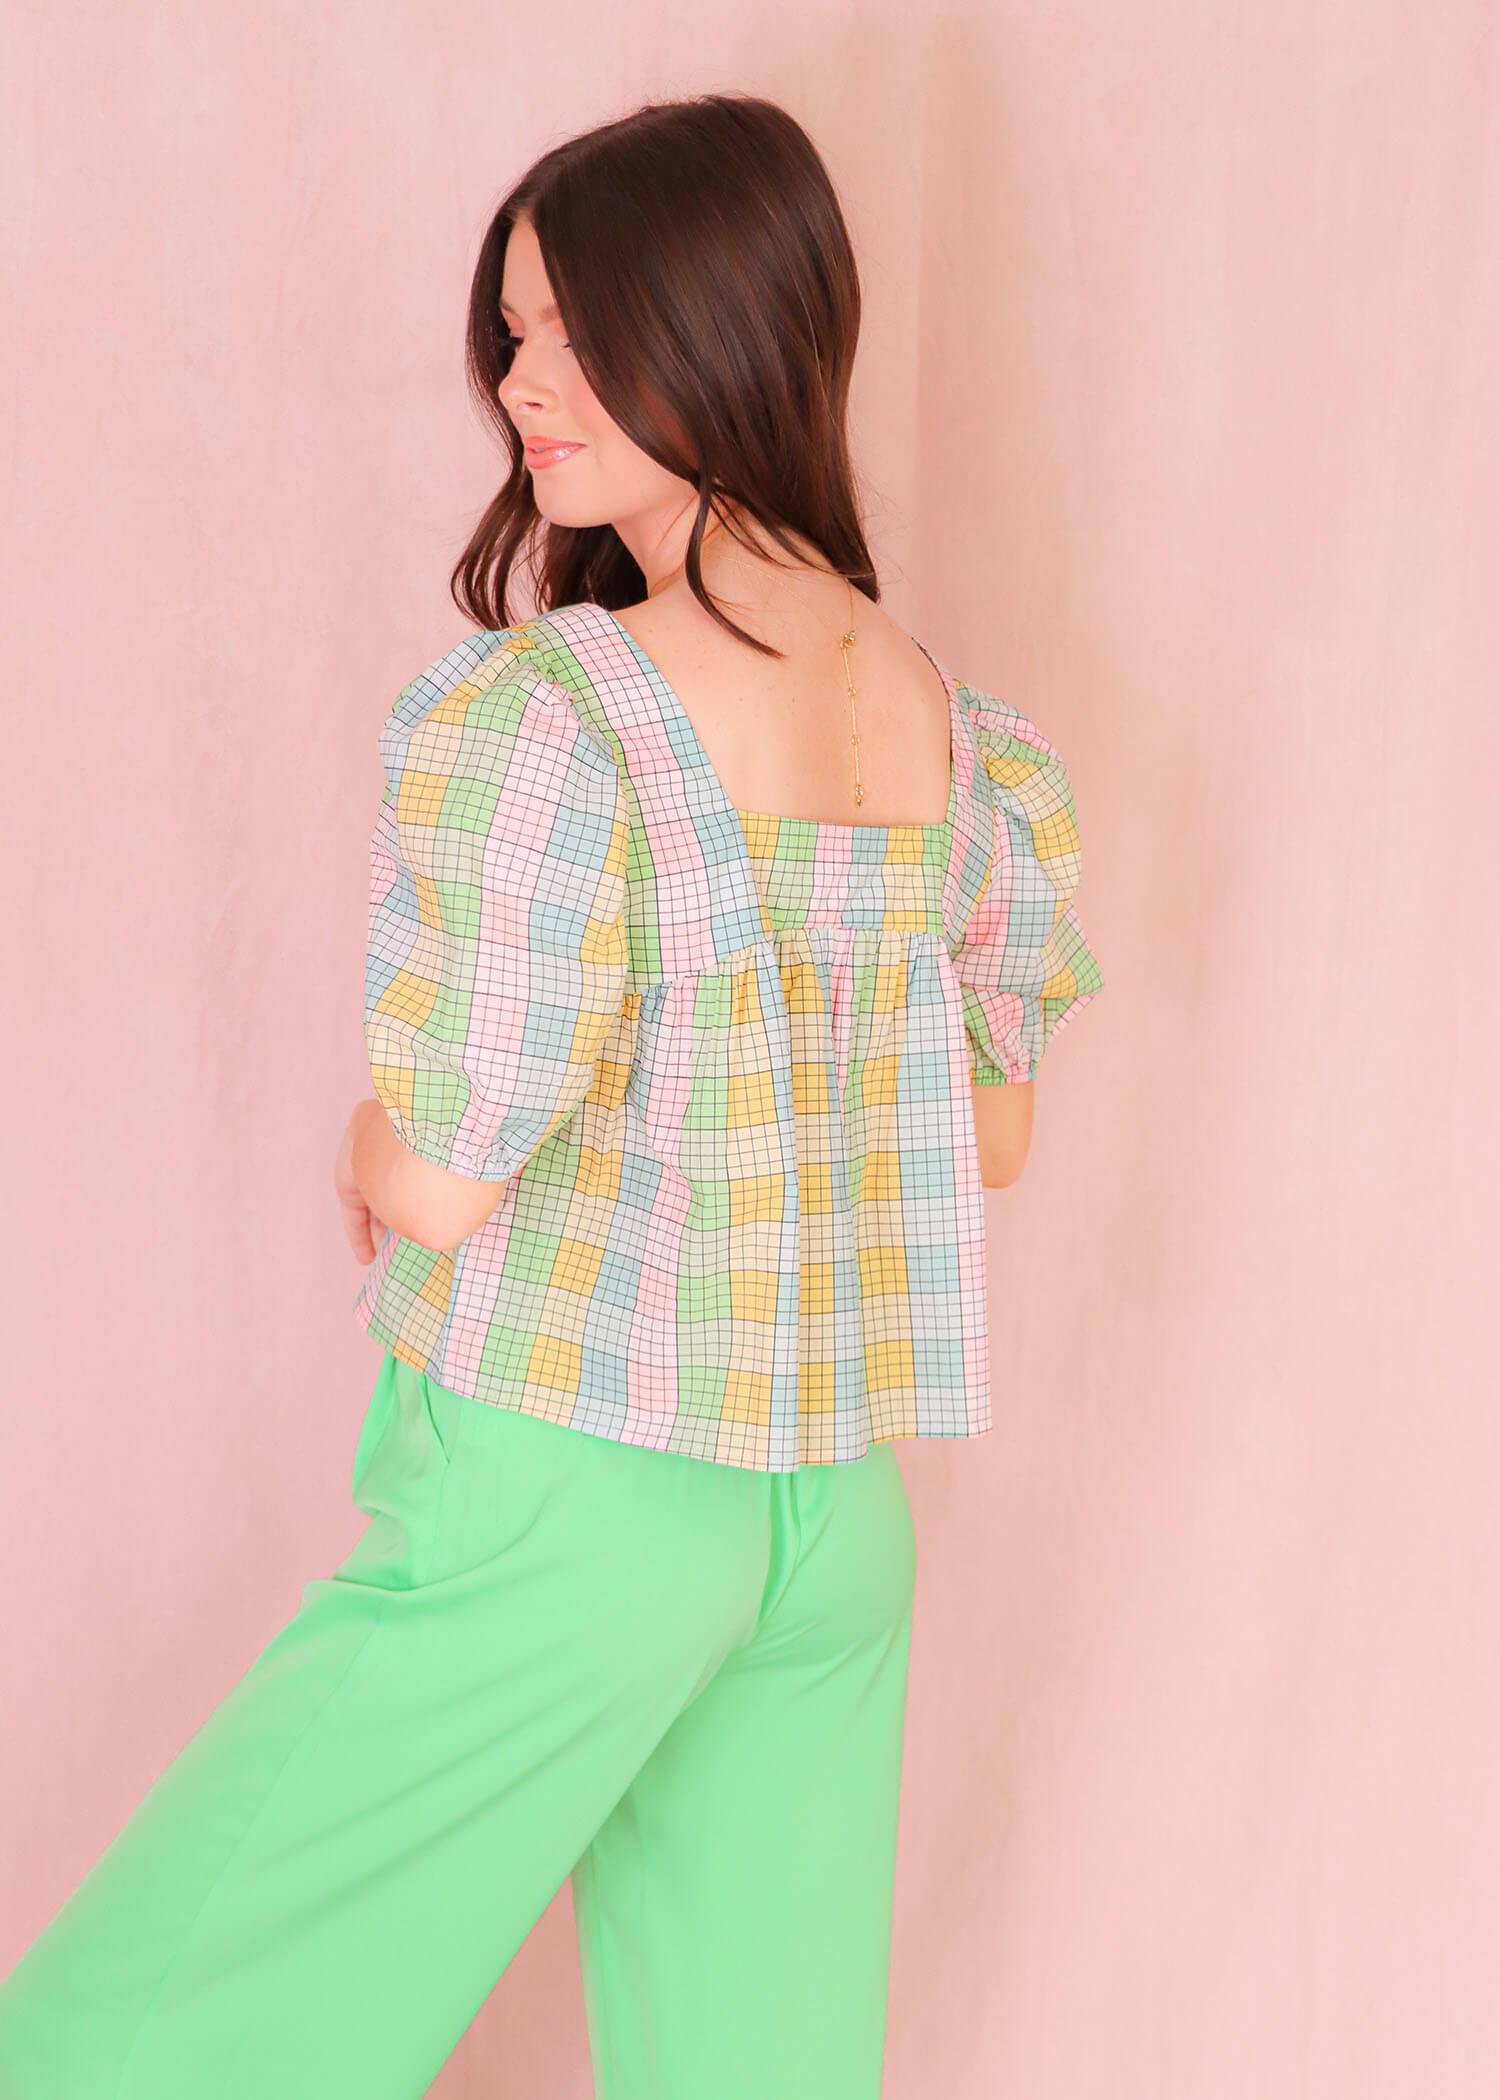 Bury Me In Pastels Baby Doll Top - Multi Color Tops MerciGrace Boutique.